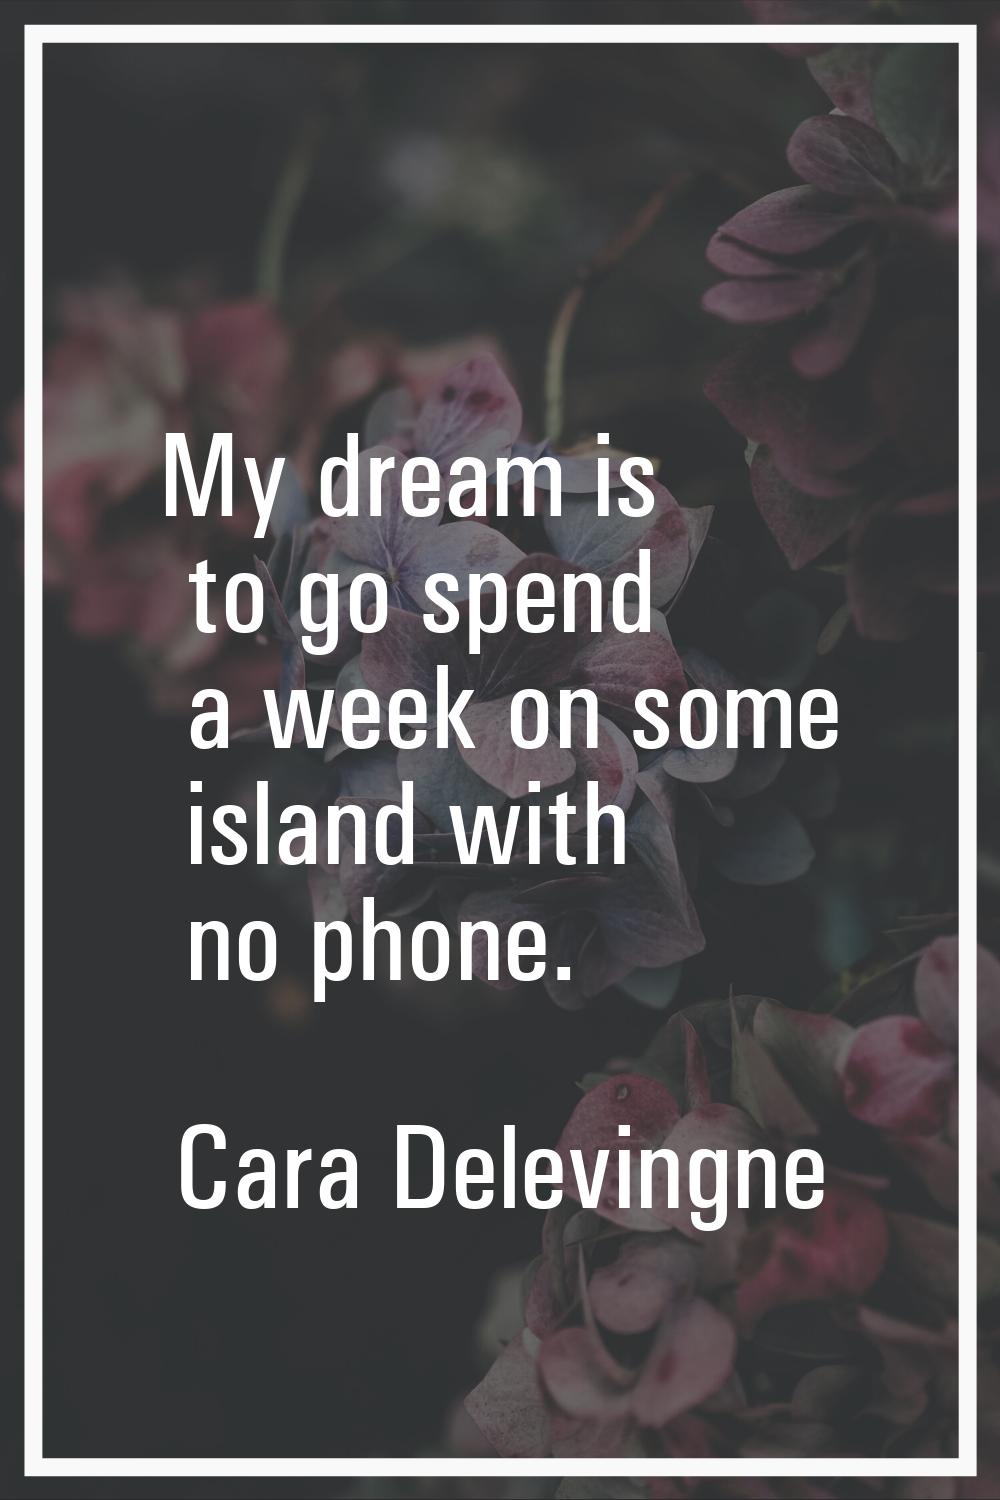 My dream is to go spend a week on some island with no phone.